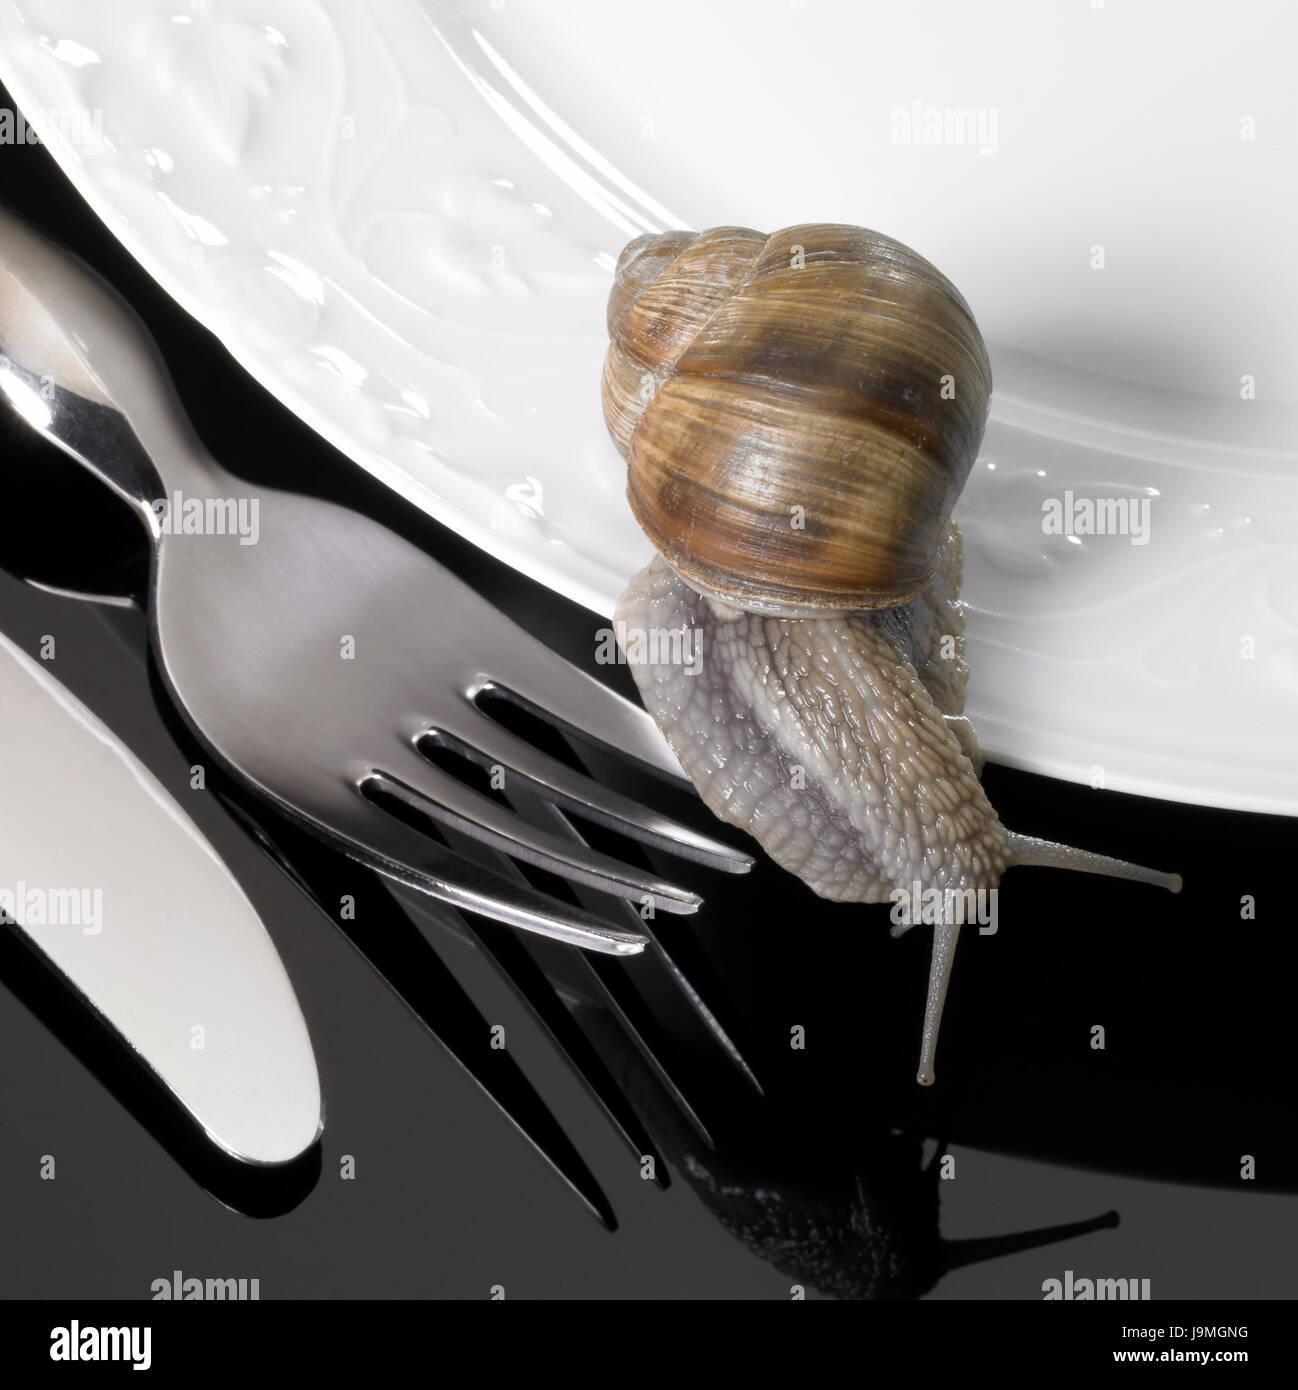 snail, edible snail, fork, cutlery, harness, motion, postponement, moving, Stock Photo